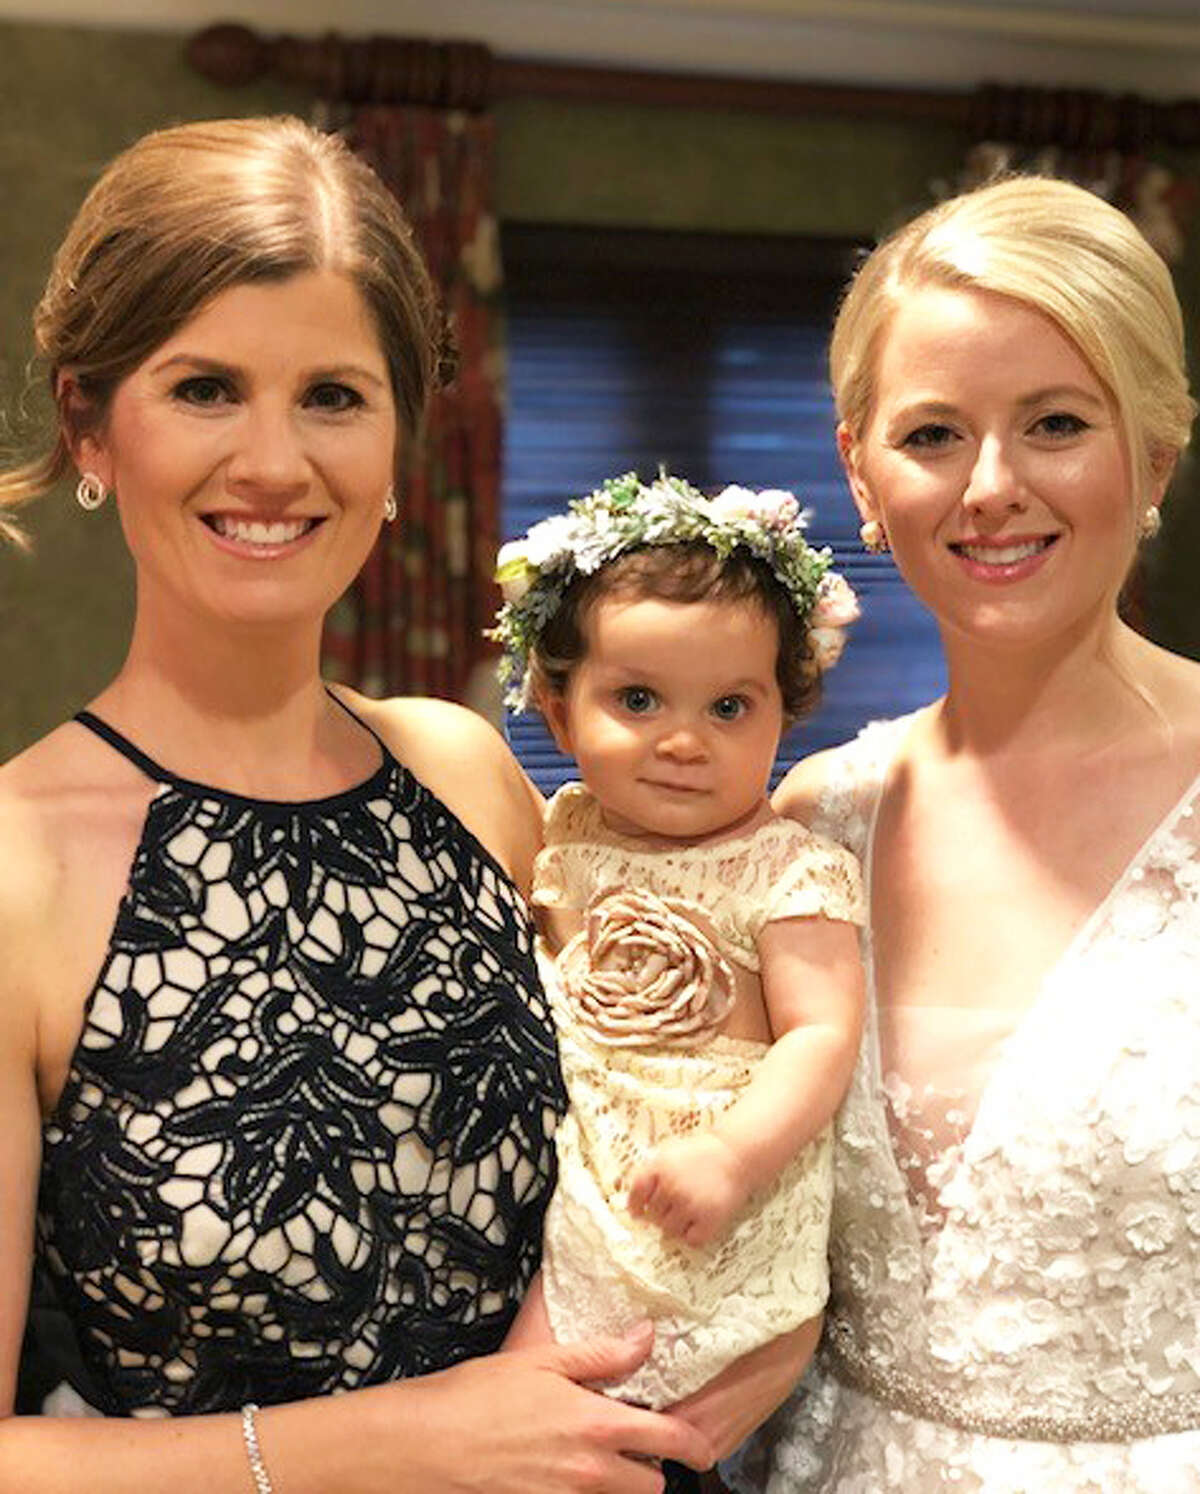 Jessica Richheimer, left, and her sister, Meredith Gugger, with Jessica’s daughter, Brooke Richheimer, at Meredith’s wedding in 2018.